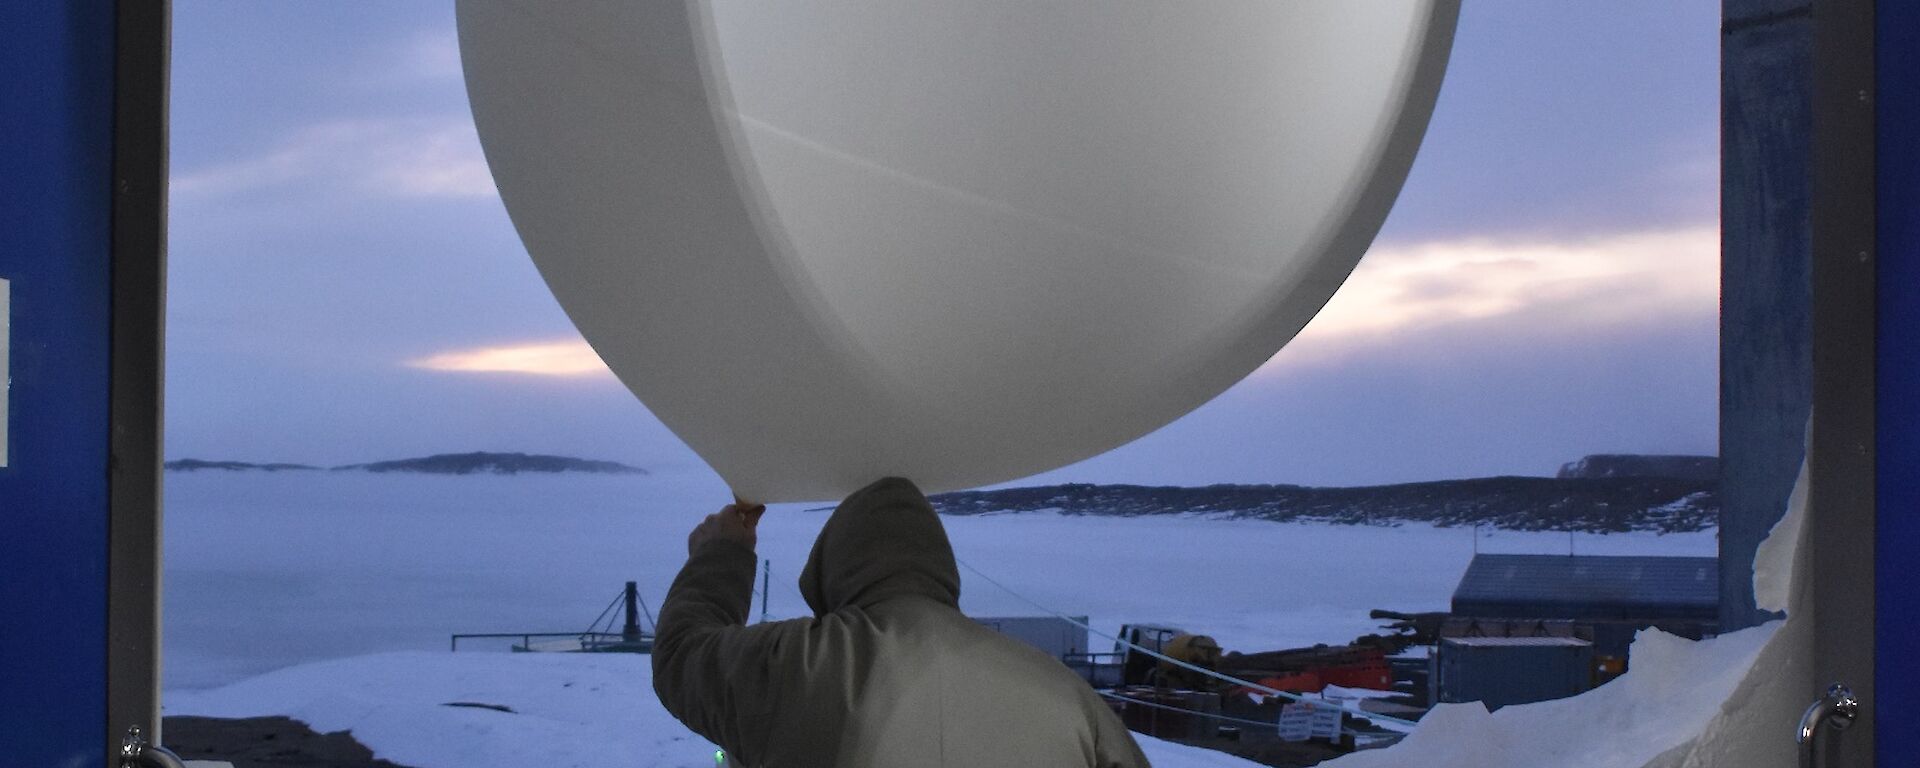 A man exits a building with a weather balloon